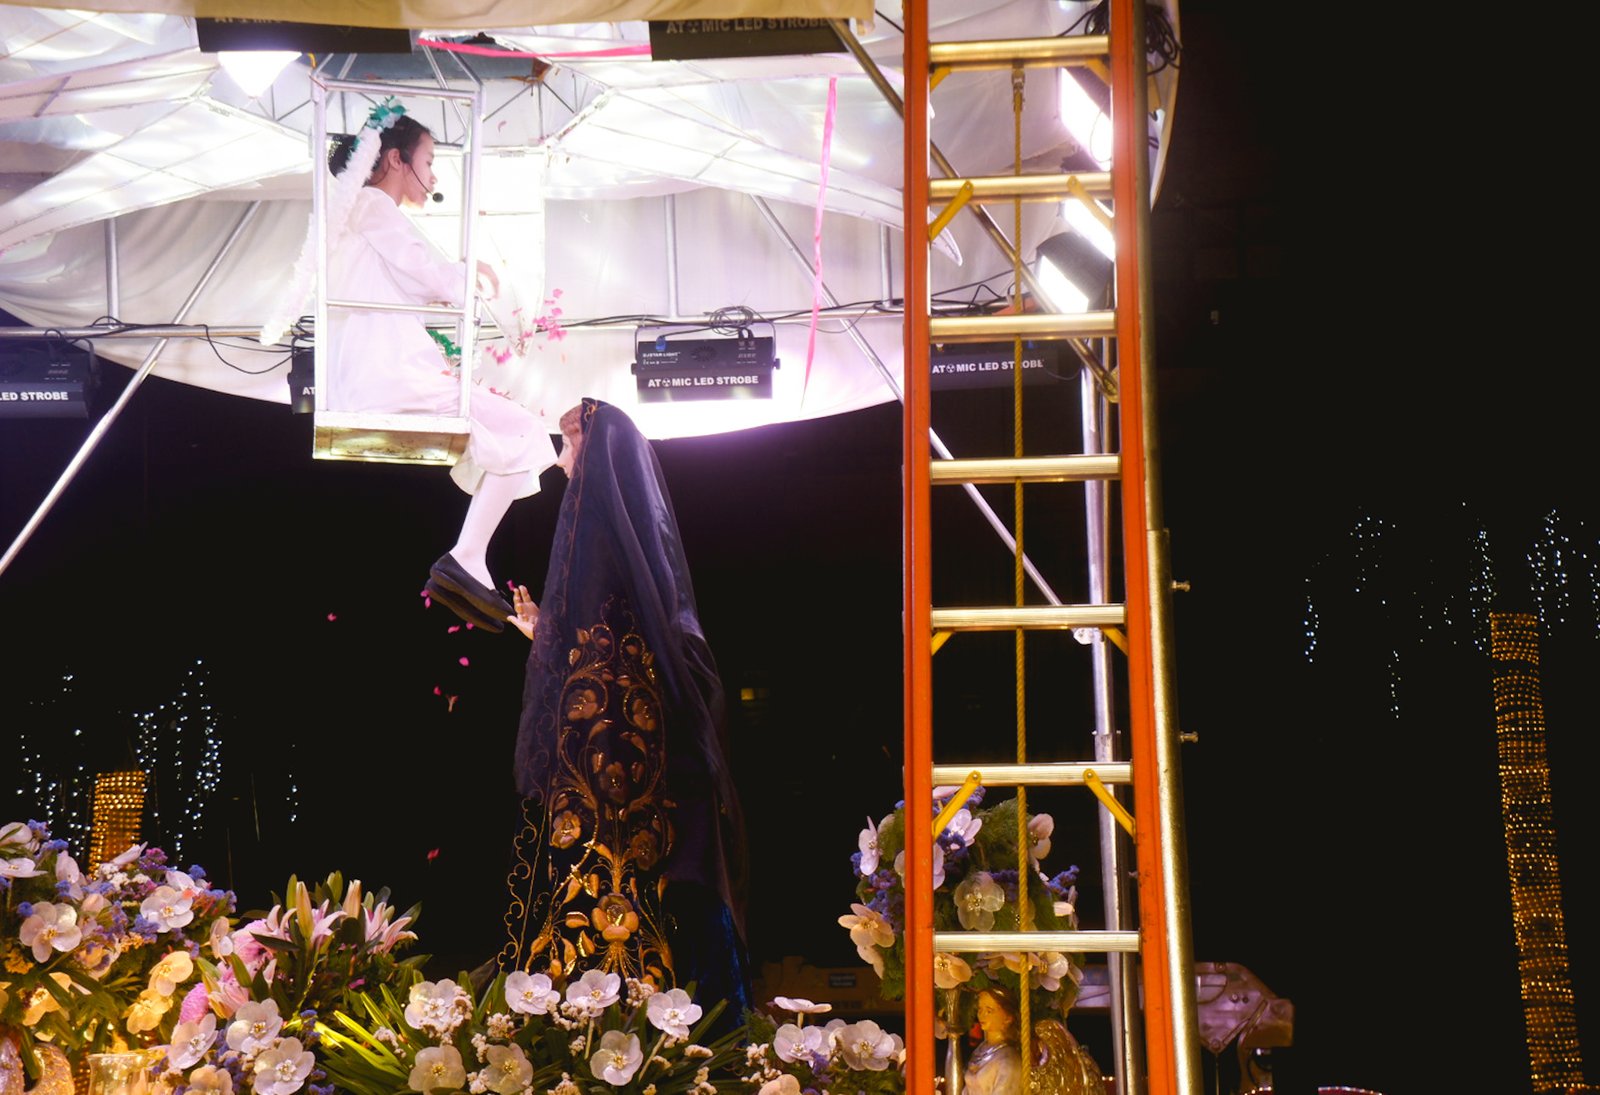 Catholic devotees gather to witness the Salubong procession on Easter Sunday in Balanga City, Bataan. Photos by Drei Cri…